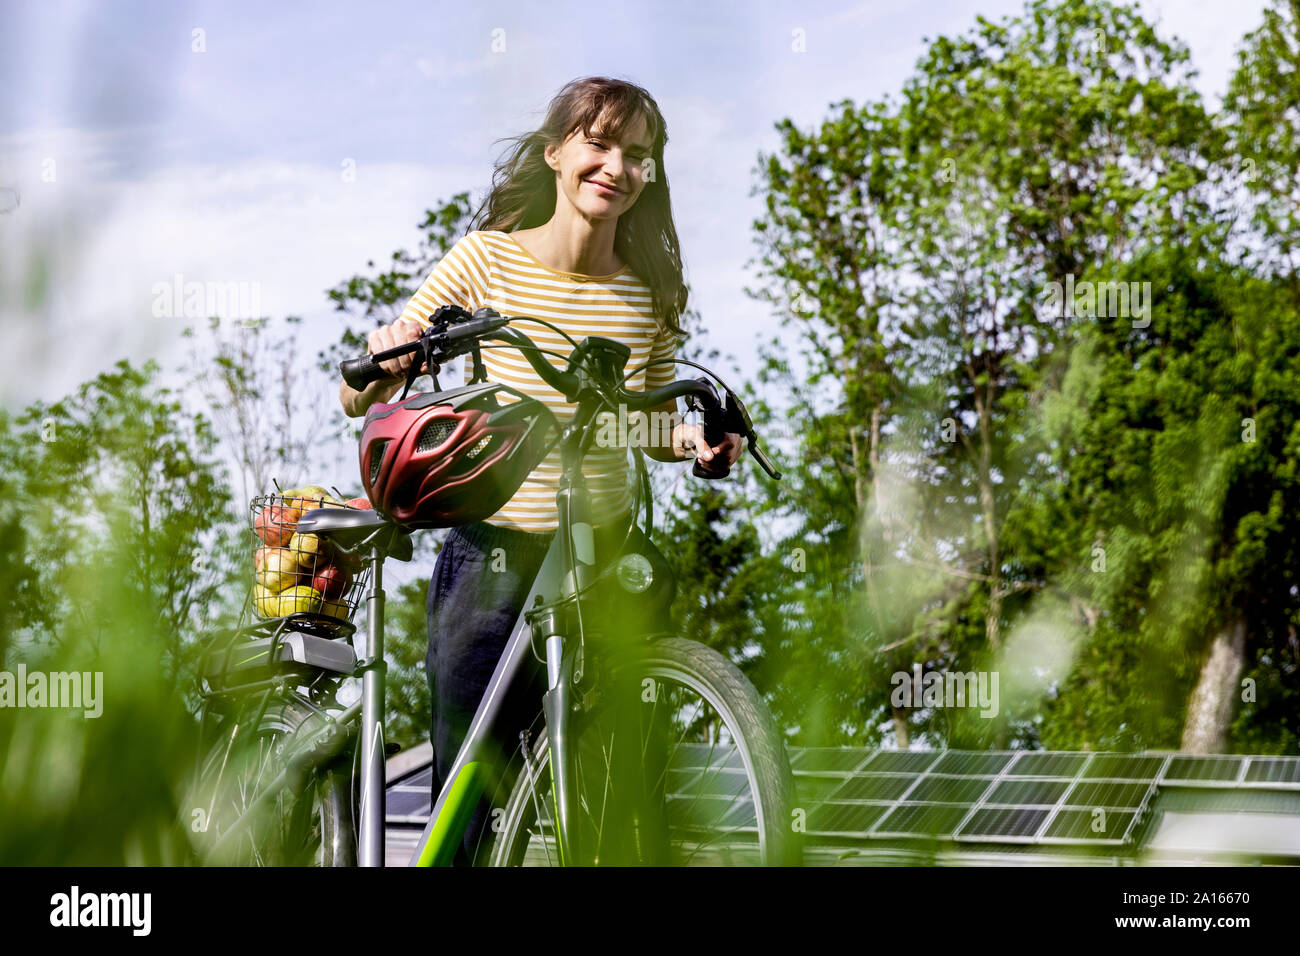 Smiling woman pushing bicycle with organic fruit on a meadow Stock Photo